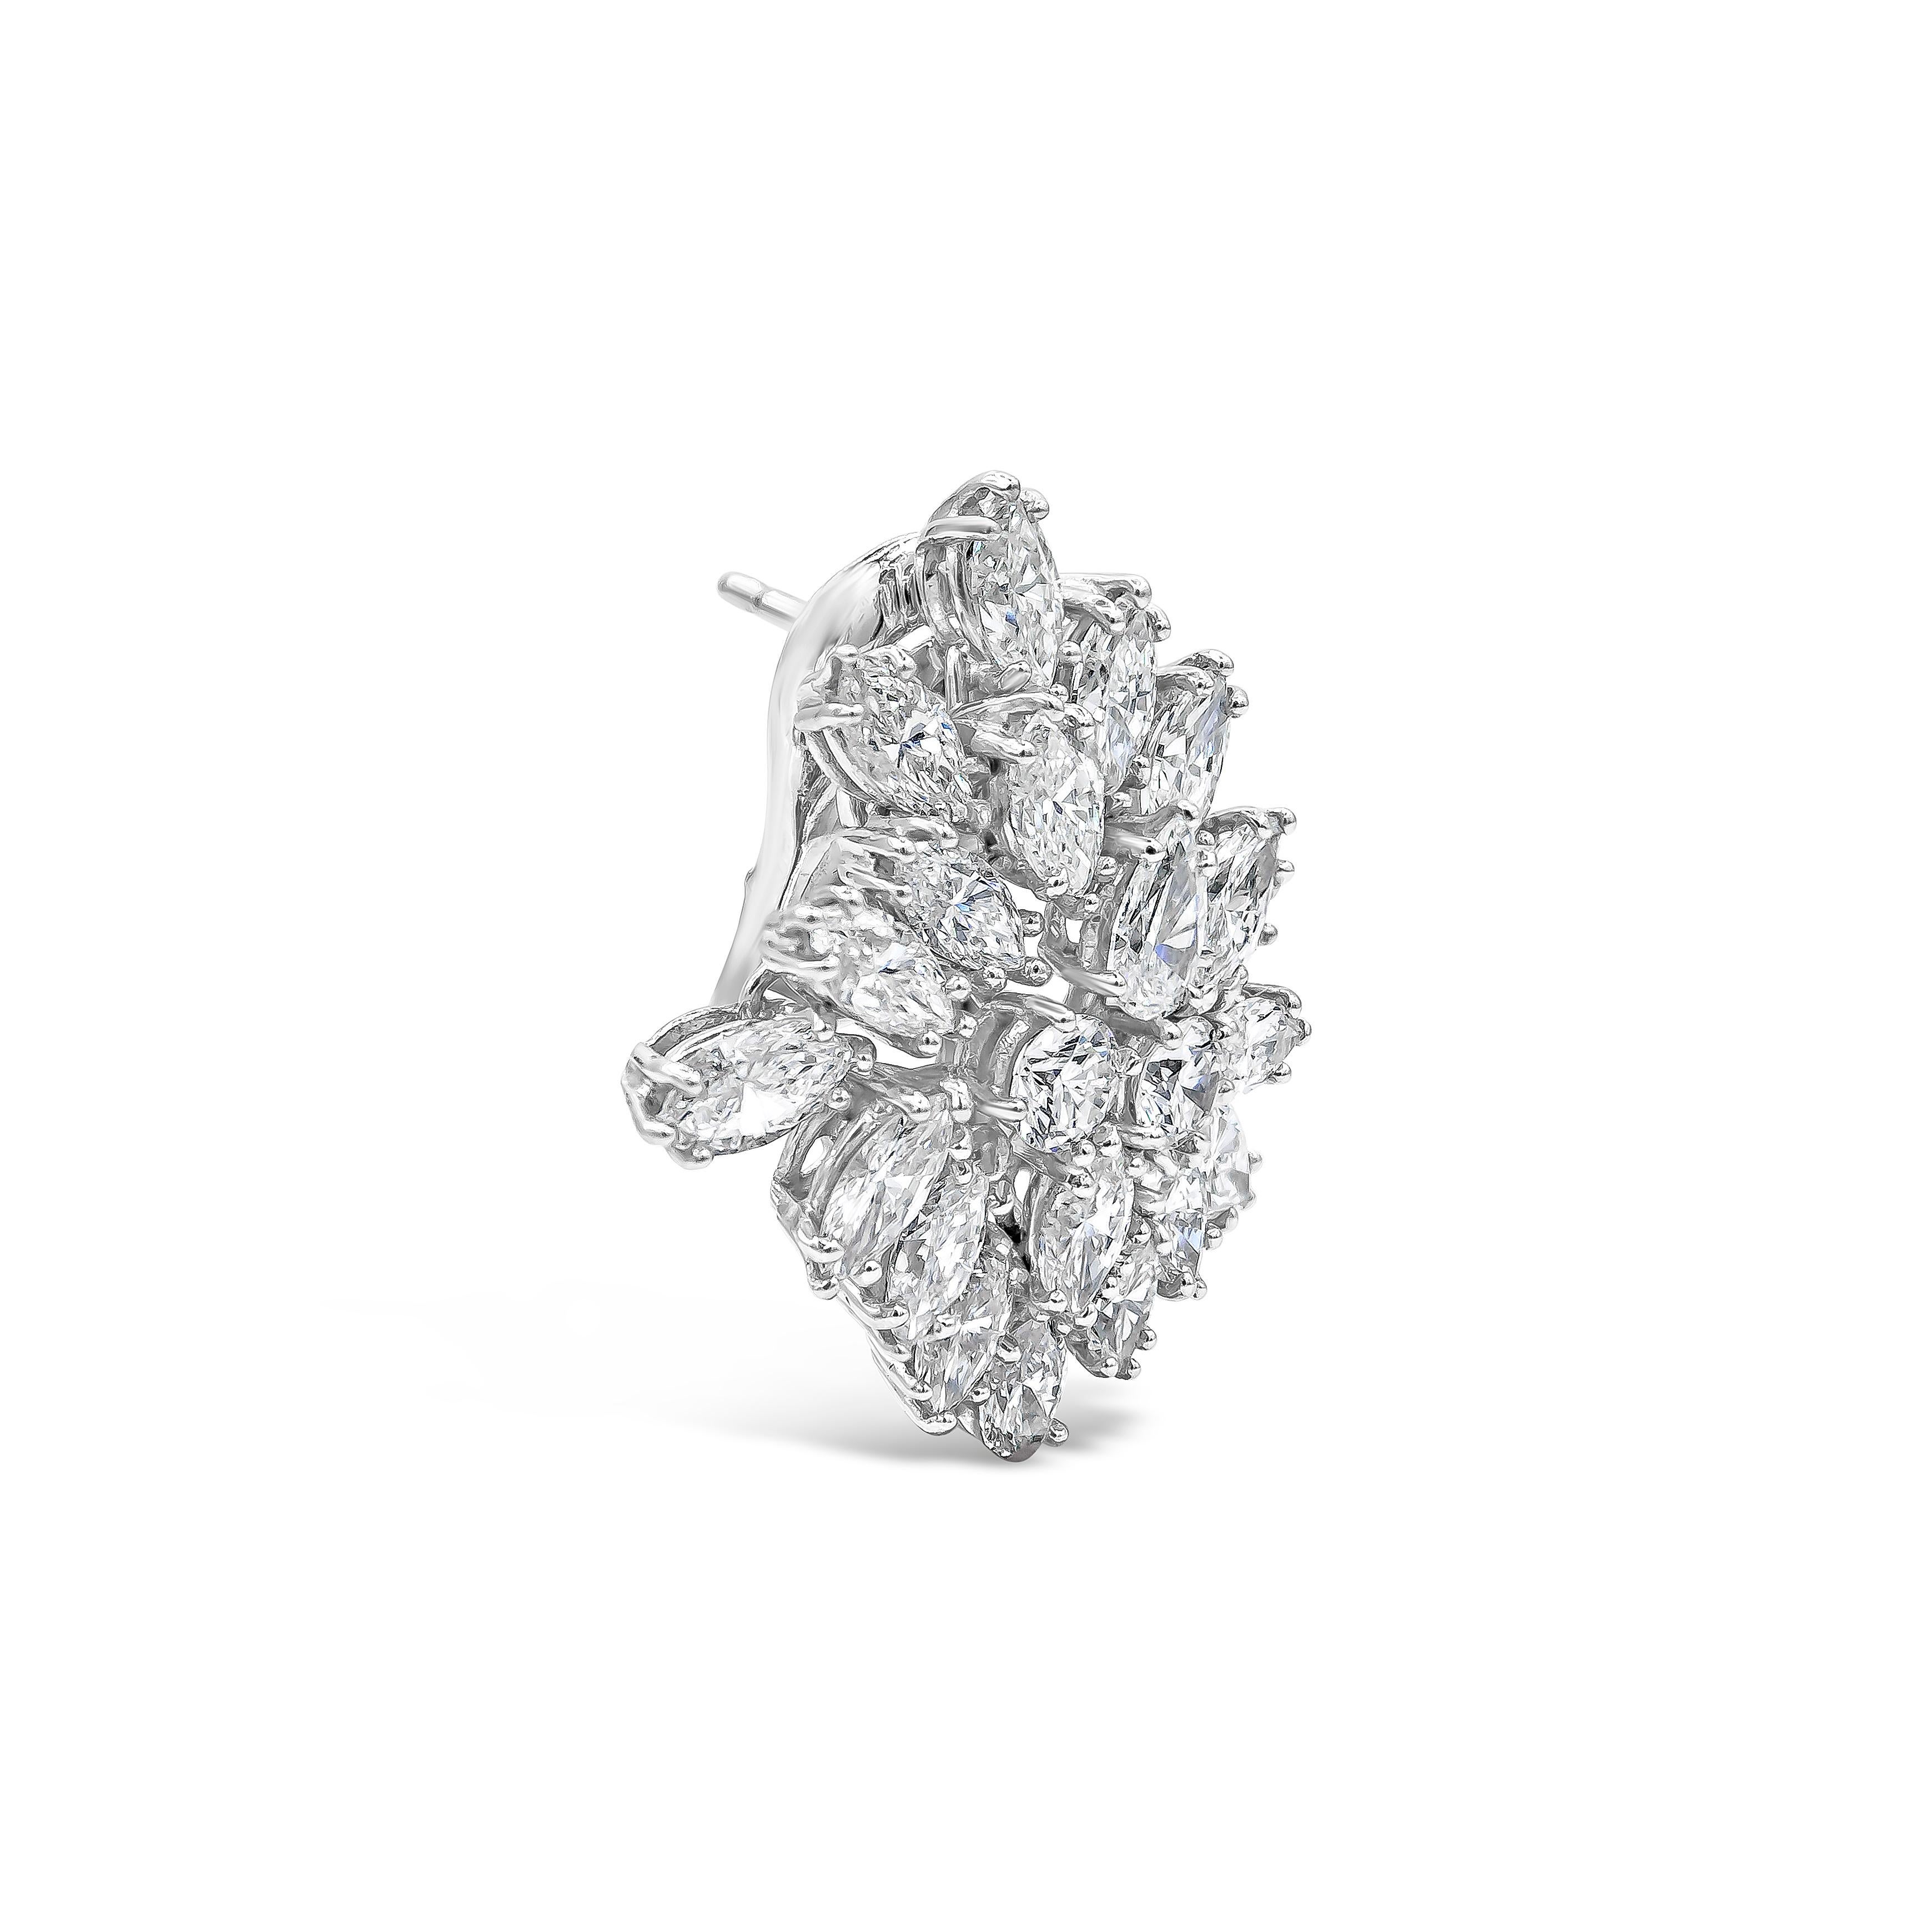 An elegant and intricate piece of jewelry that showcases round, pear, and marquise cut diamonds set in an intricate starburst design. Diamonds weigh 9.73 carats total. Set in platinum. Omega Clip with post.

Style available in different price